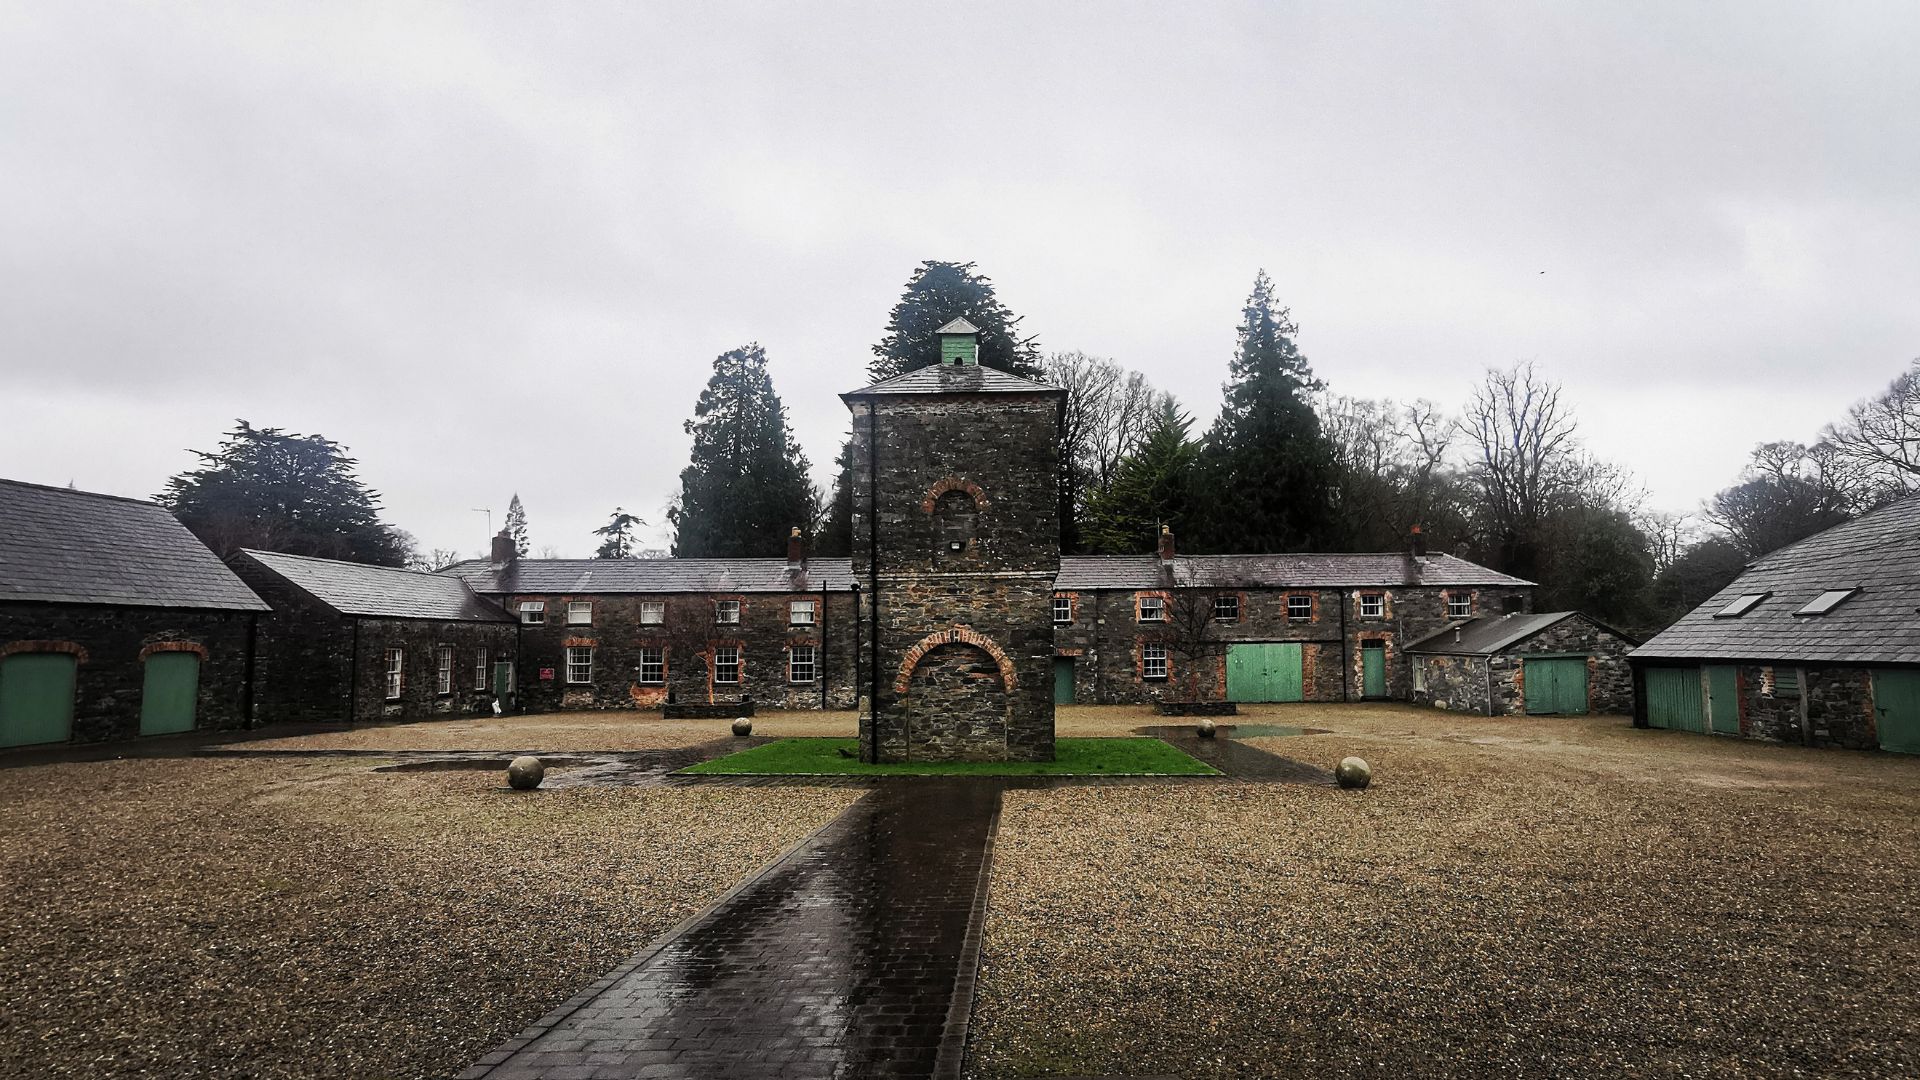 The historic courtyard within Clandeboye Estate near Bangor, Co. Down. Part of the estate made up Pinetum Camp, a motor vehicle distributing depot for the U.S. Army during the Second World War.